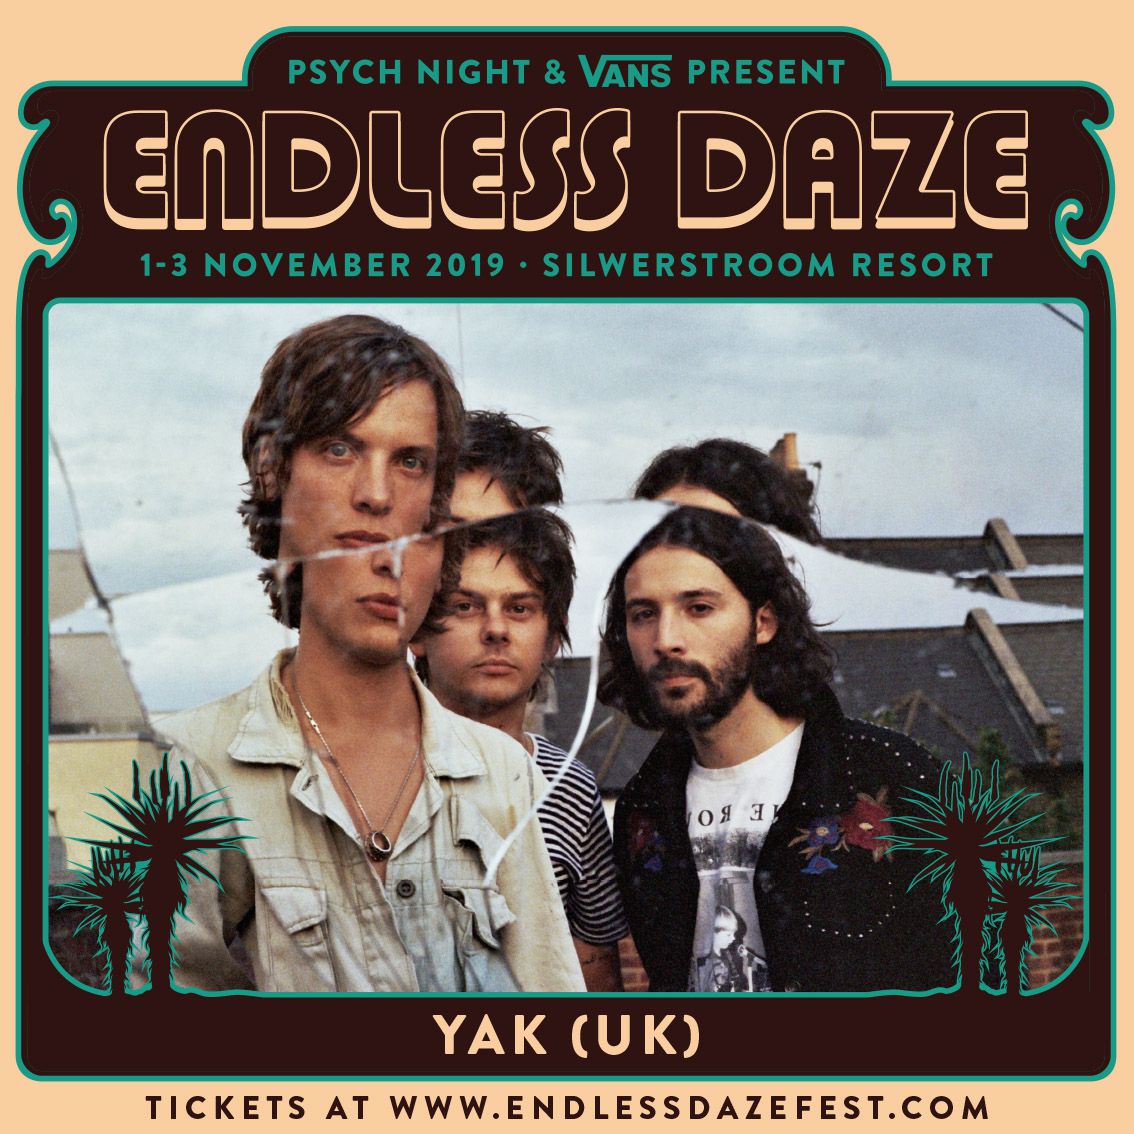 10 additional acts added to Endless Daze 2019 lineup